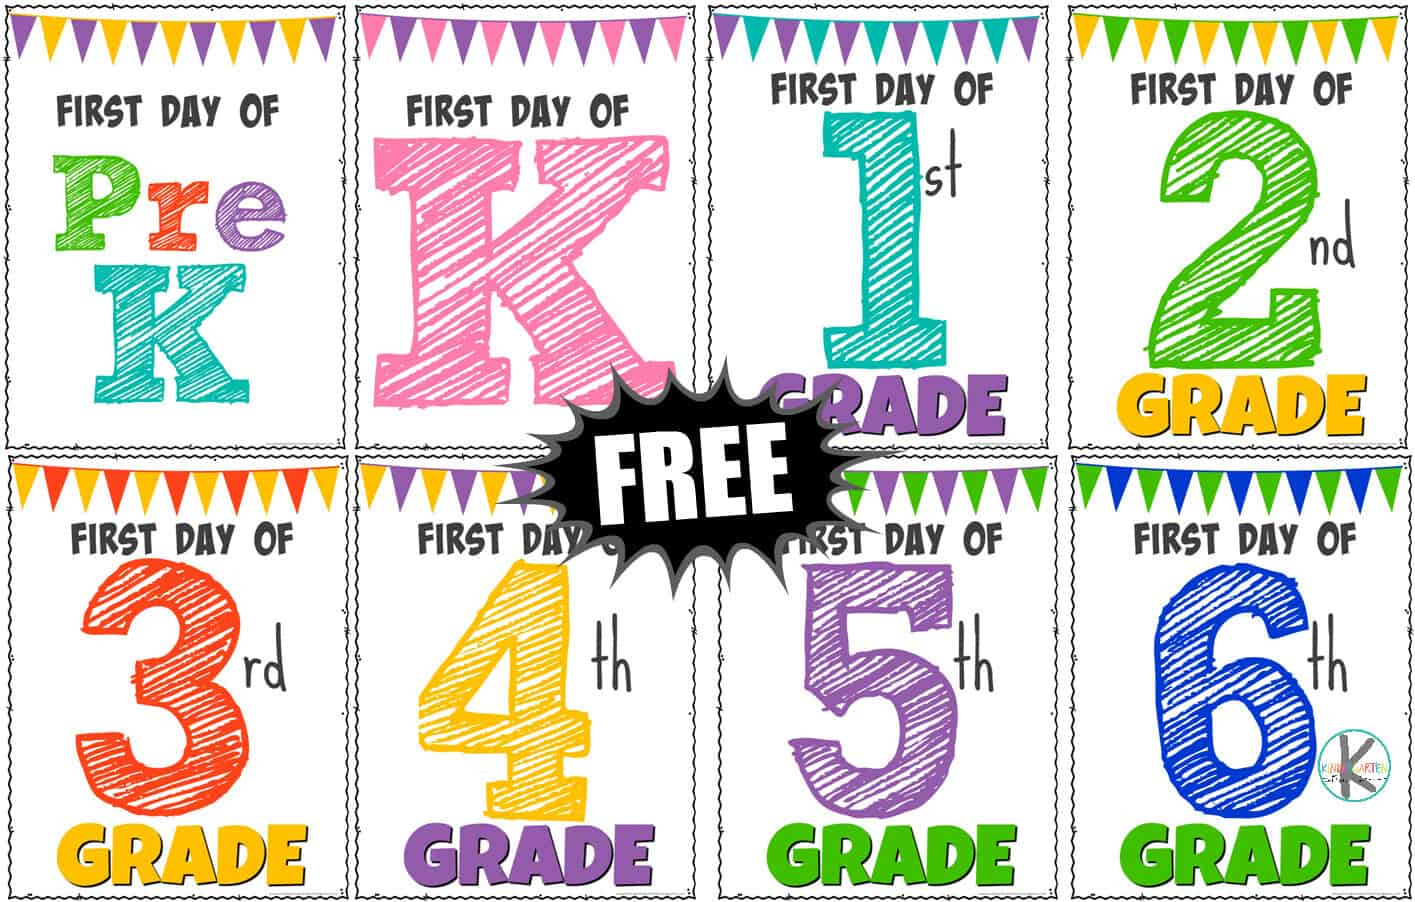 Printable First Day Of School Signs